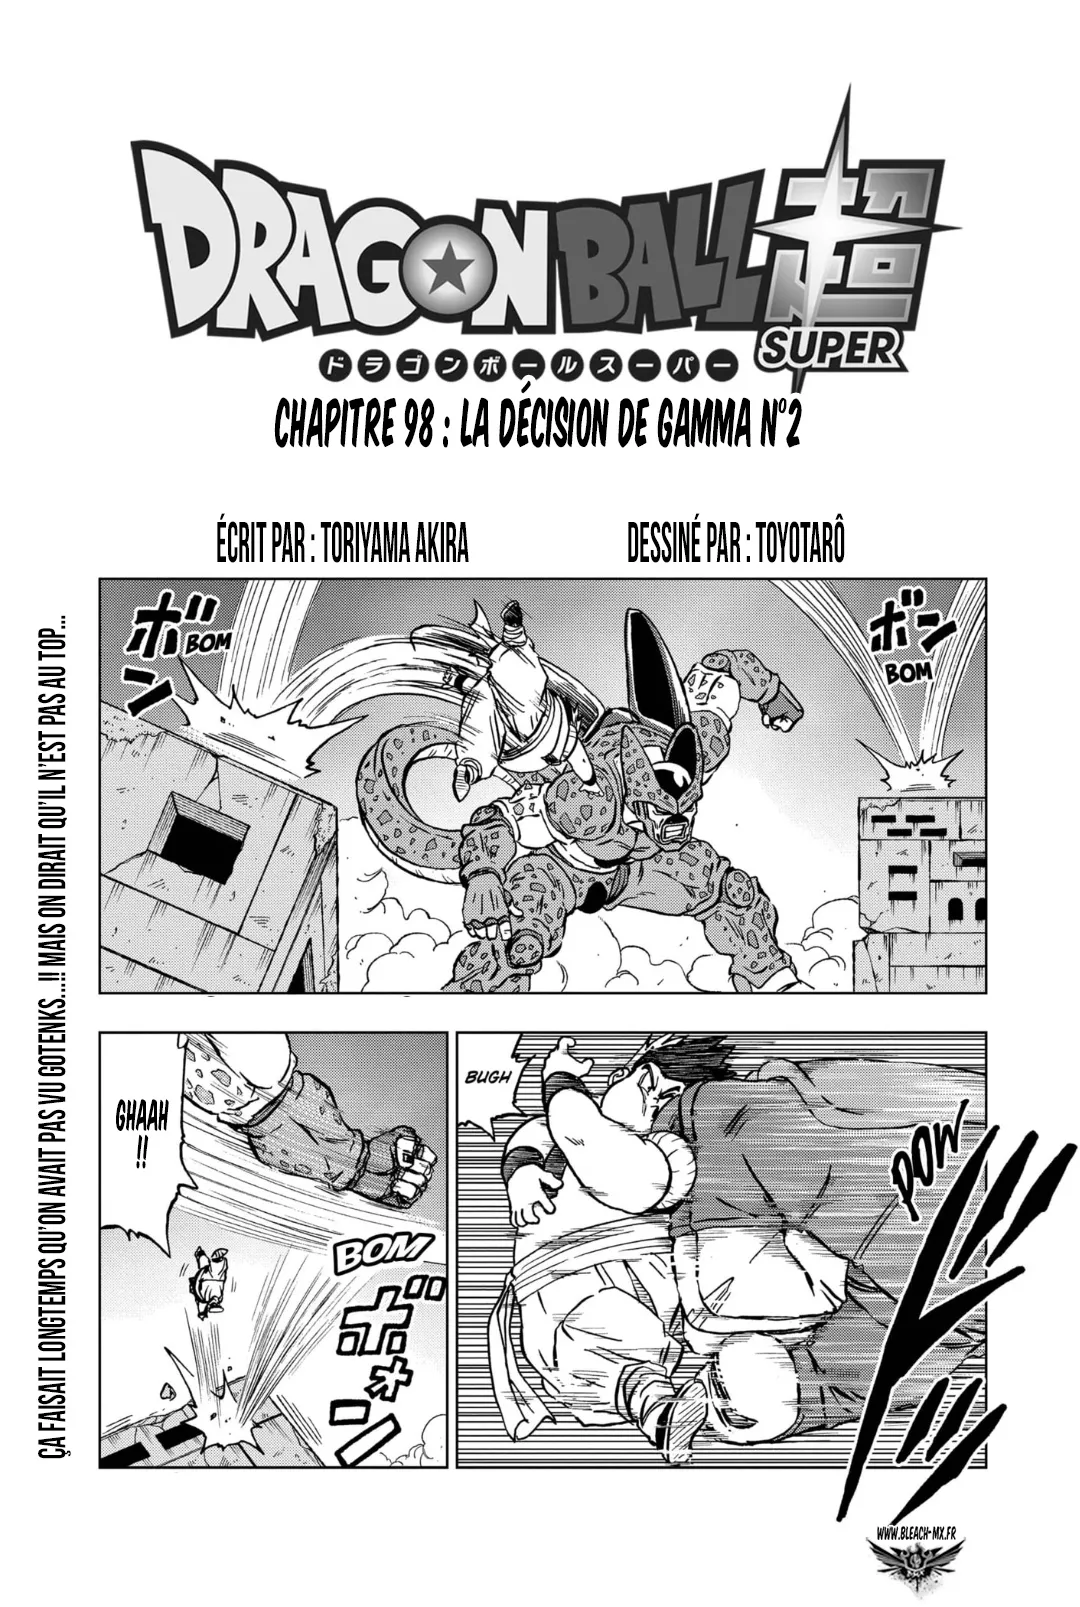 Dragon Ball Super: Chapter chapitre-98 - Page 1